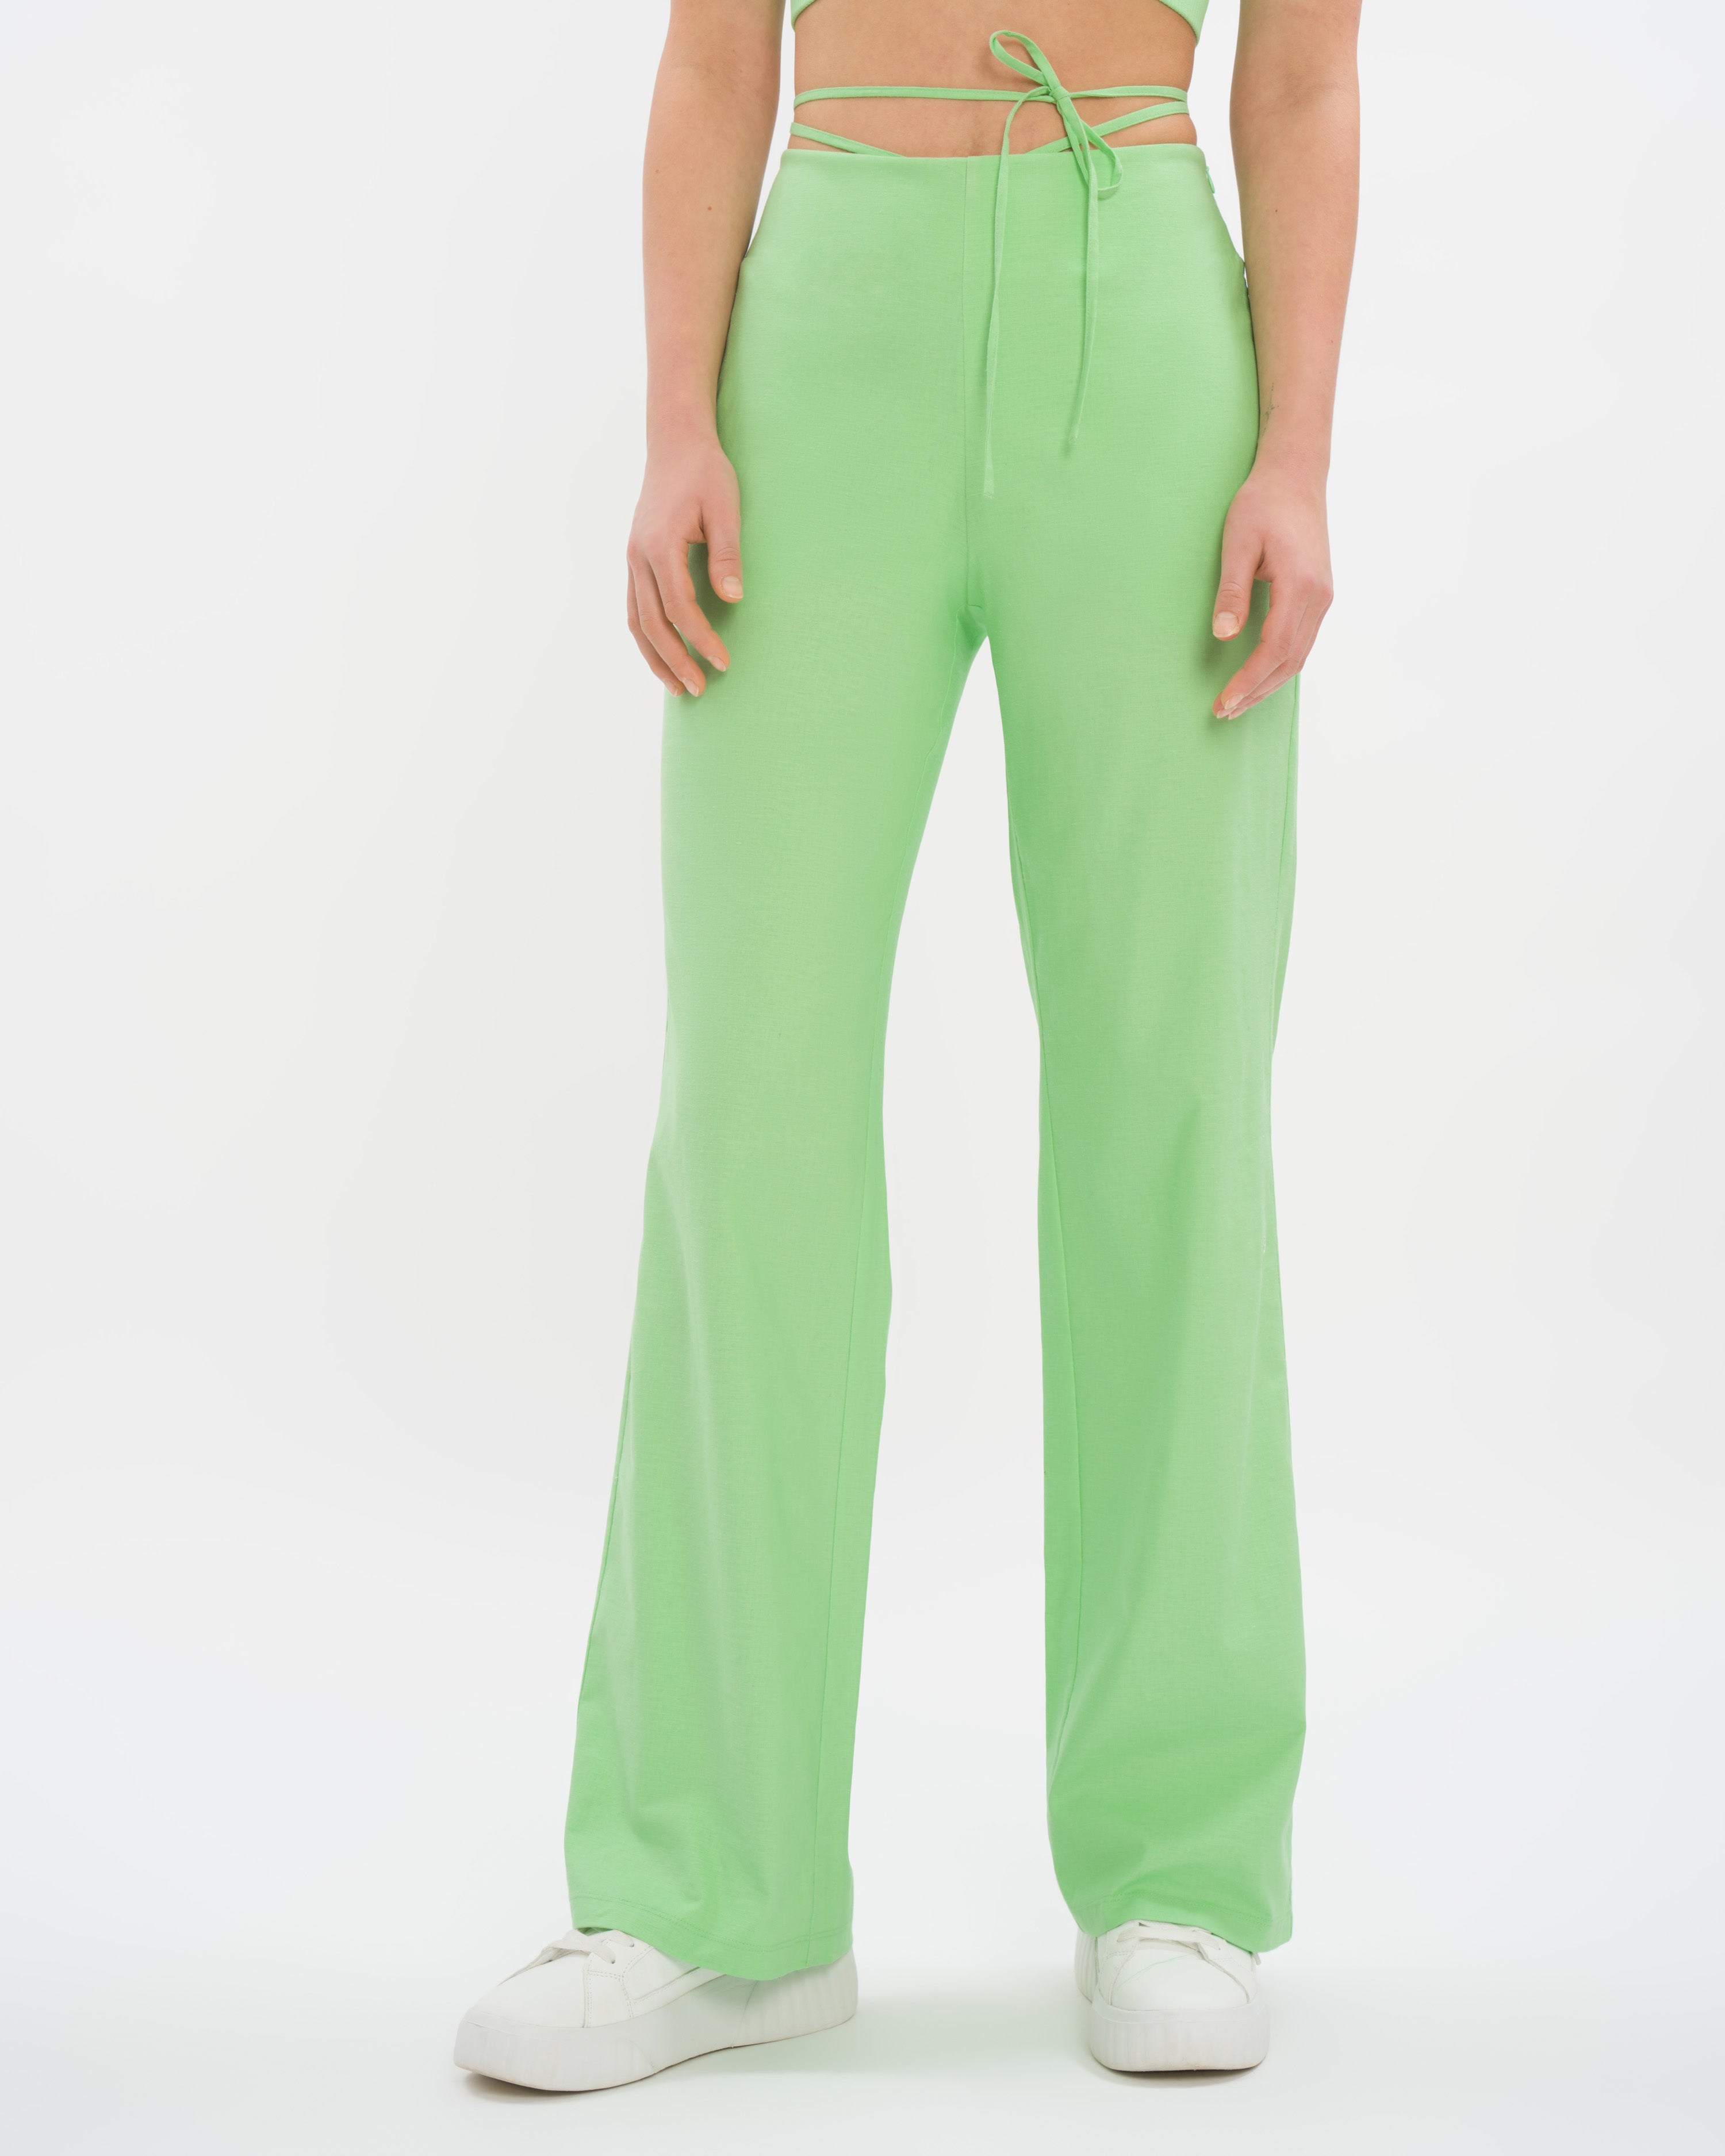 Lily Set Deluxe Petite - Cider Green